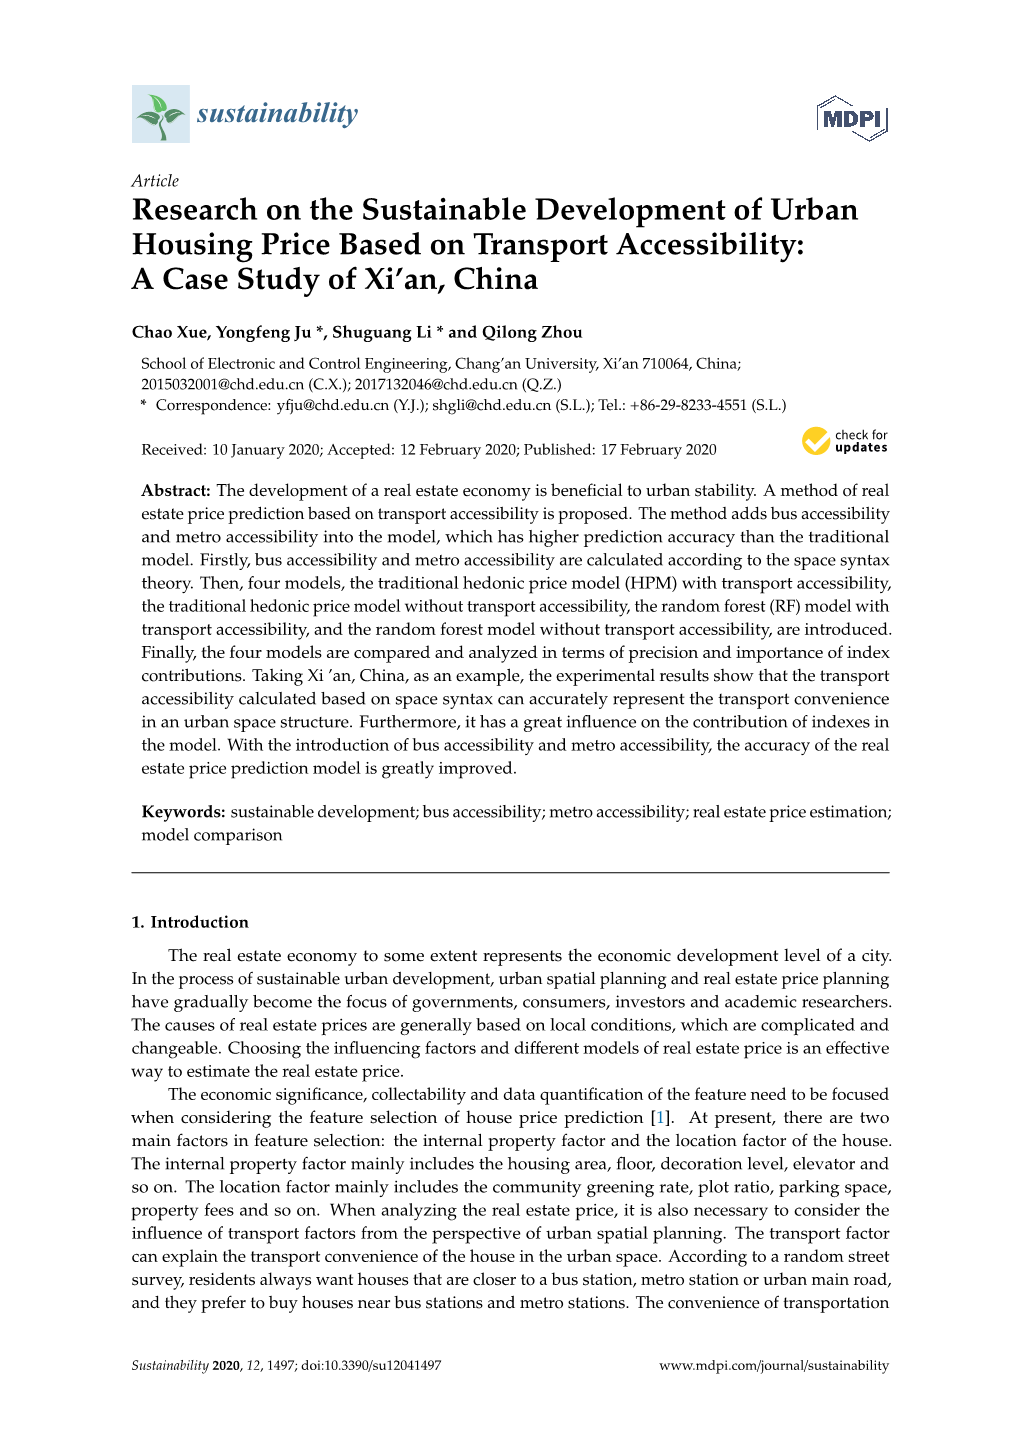 Research on the Sustainable Development of Urban Housing Price Based on Transport Accessibility: a Case Study of Xi'an, China